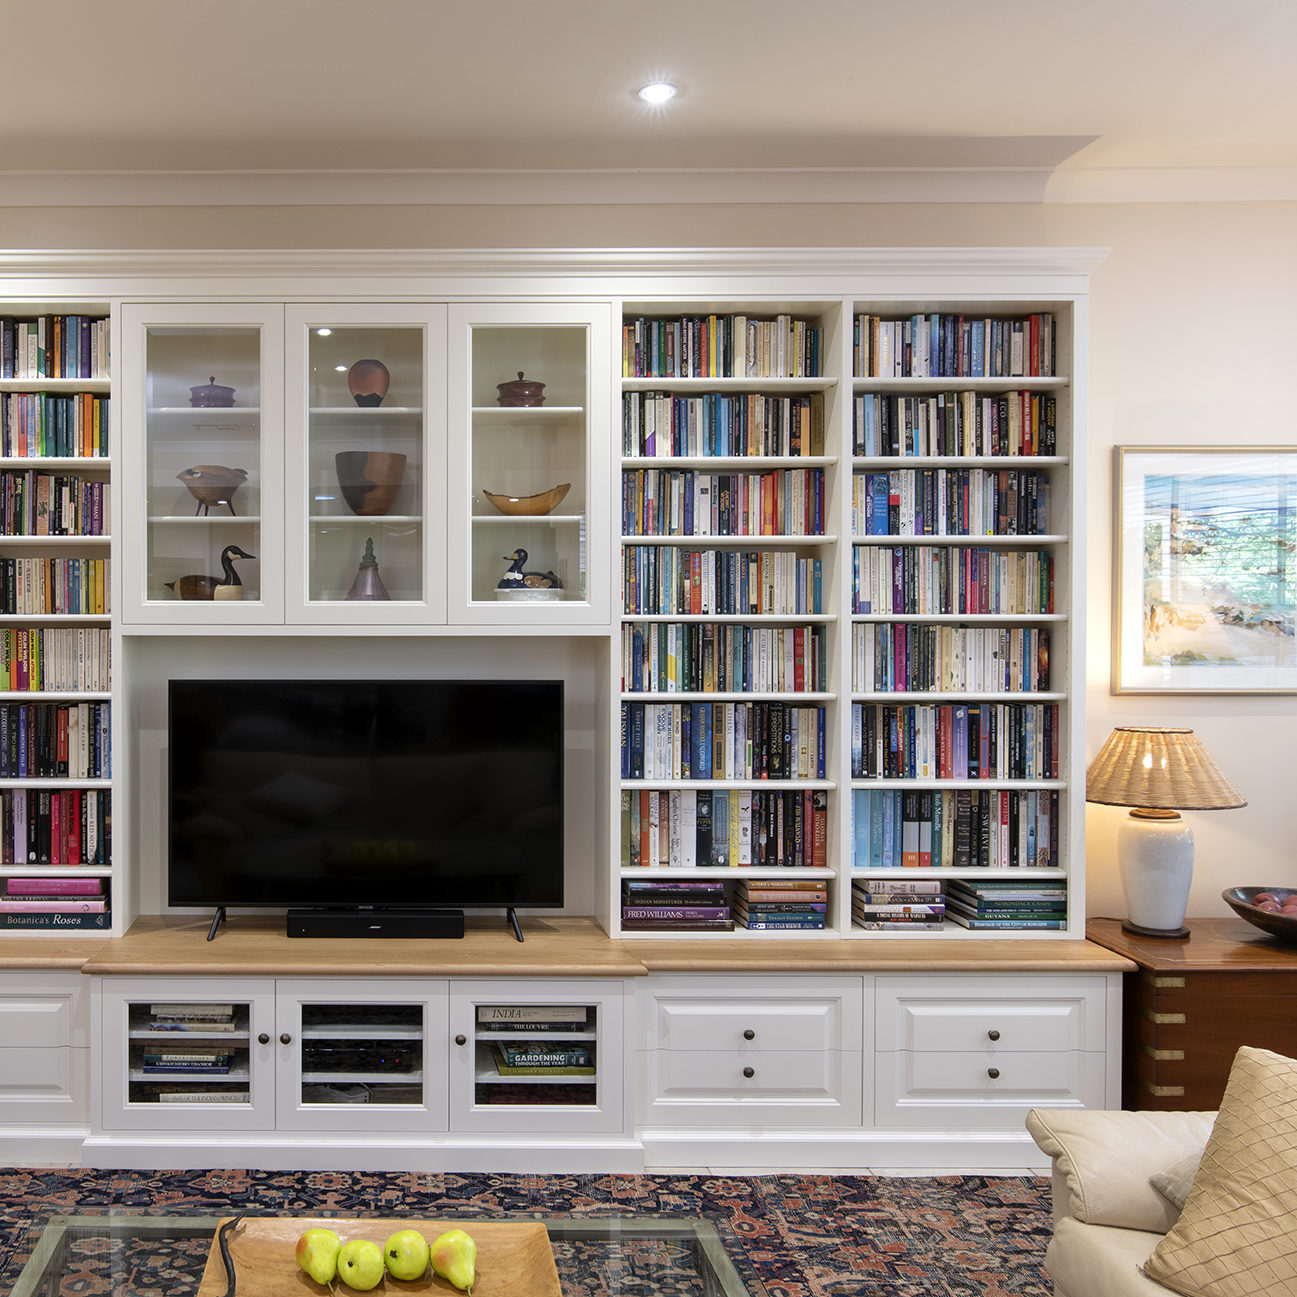 Built-in Book shelf and Entertainment cabinet-painted White oak